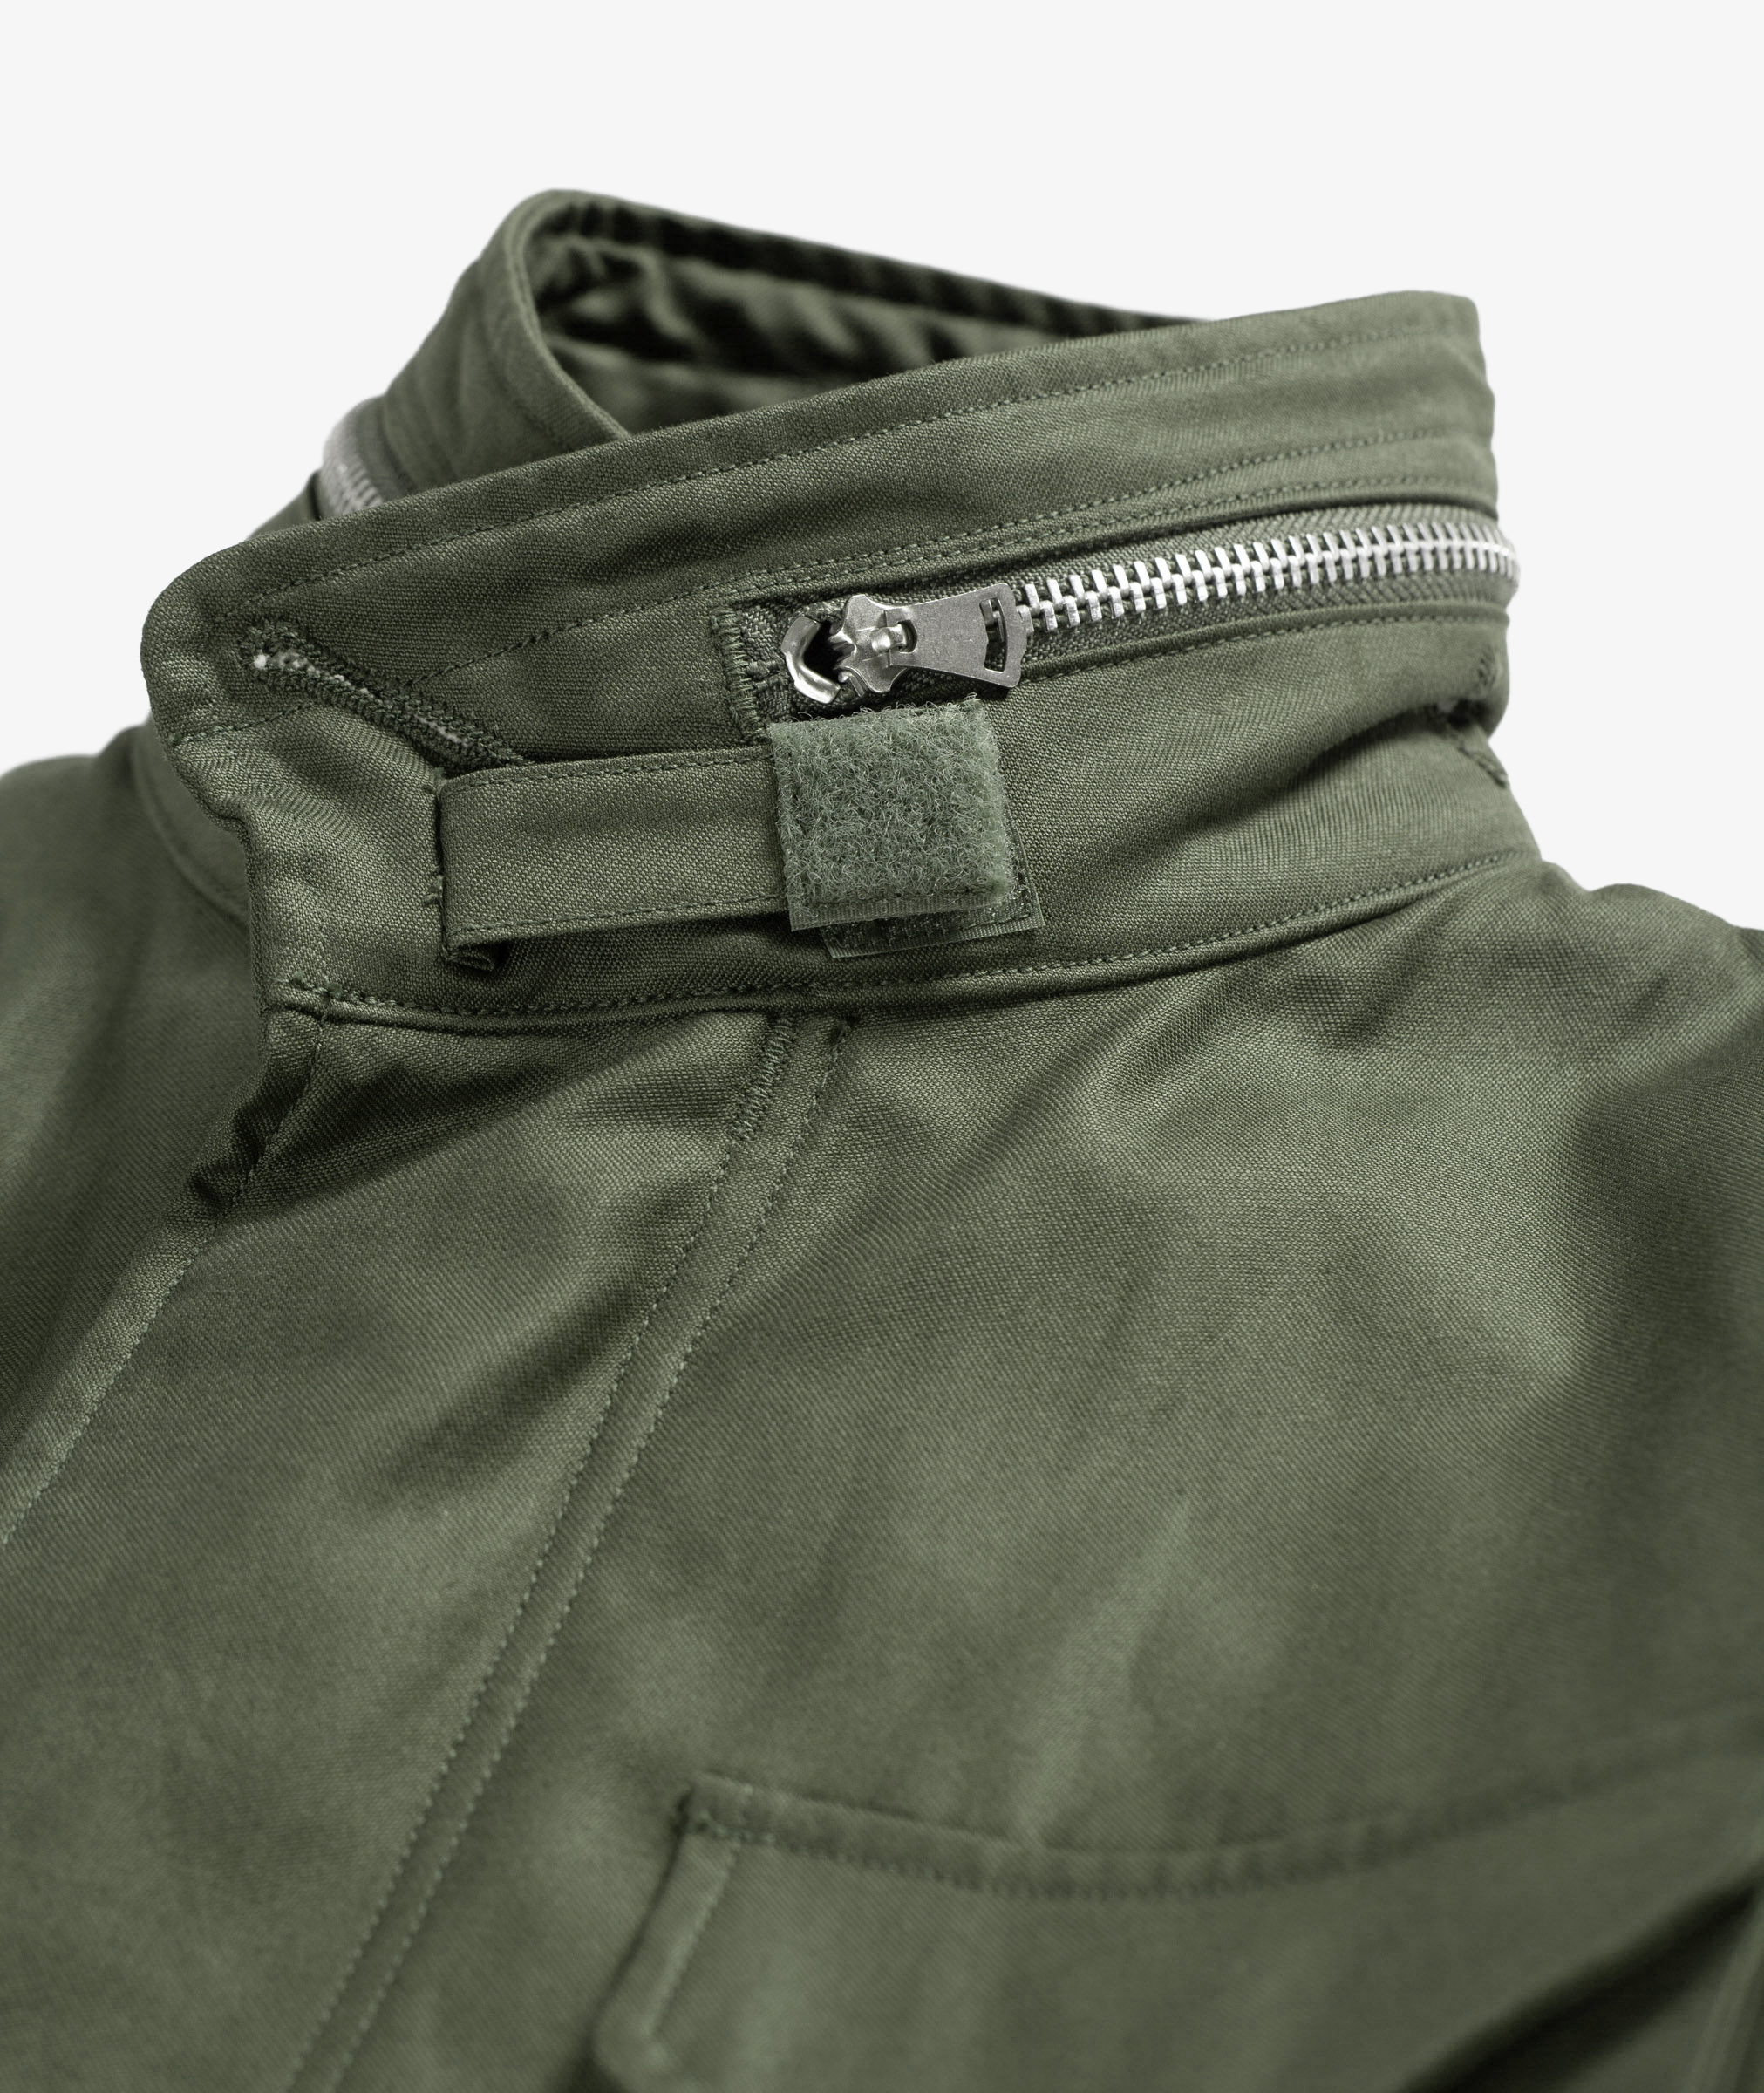 Norse Store | Shipping Worldwide - Orslow M65 Field Jacket - Army green